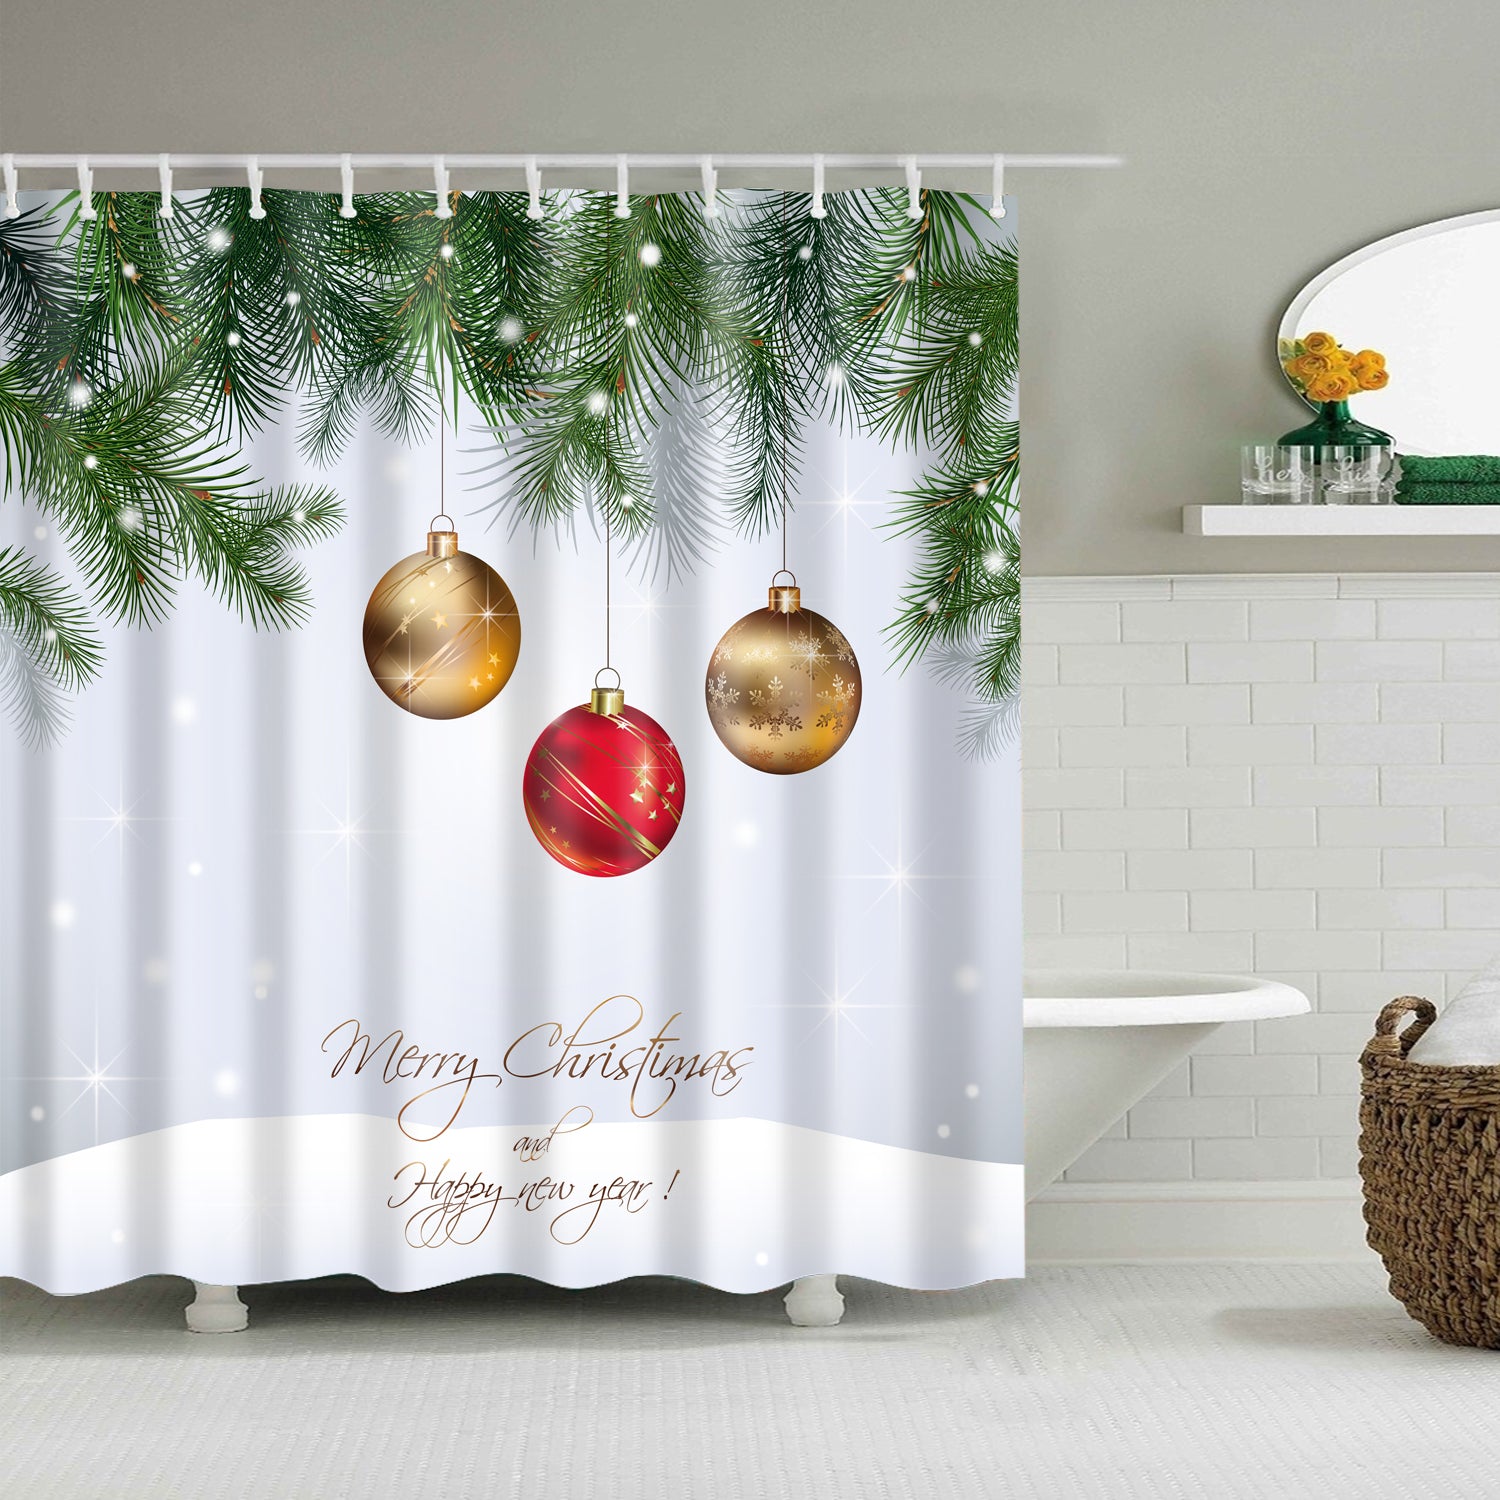 White Backdrop Hanging Christmas Baubles Shower Curtain